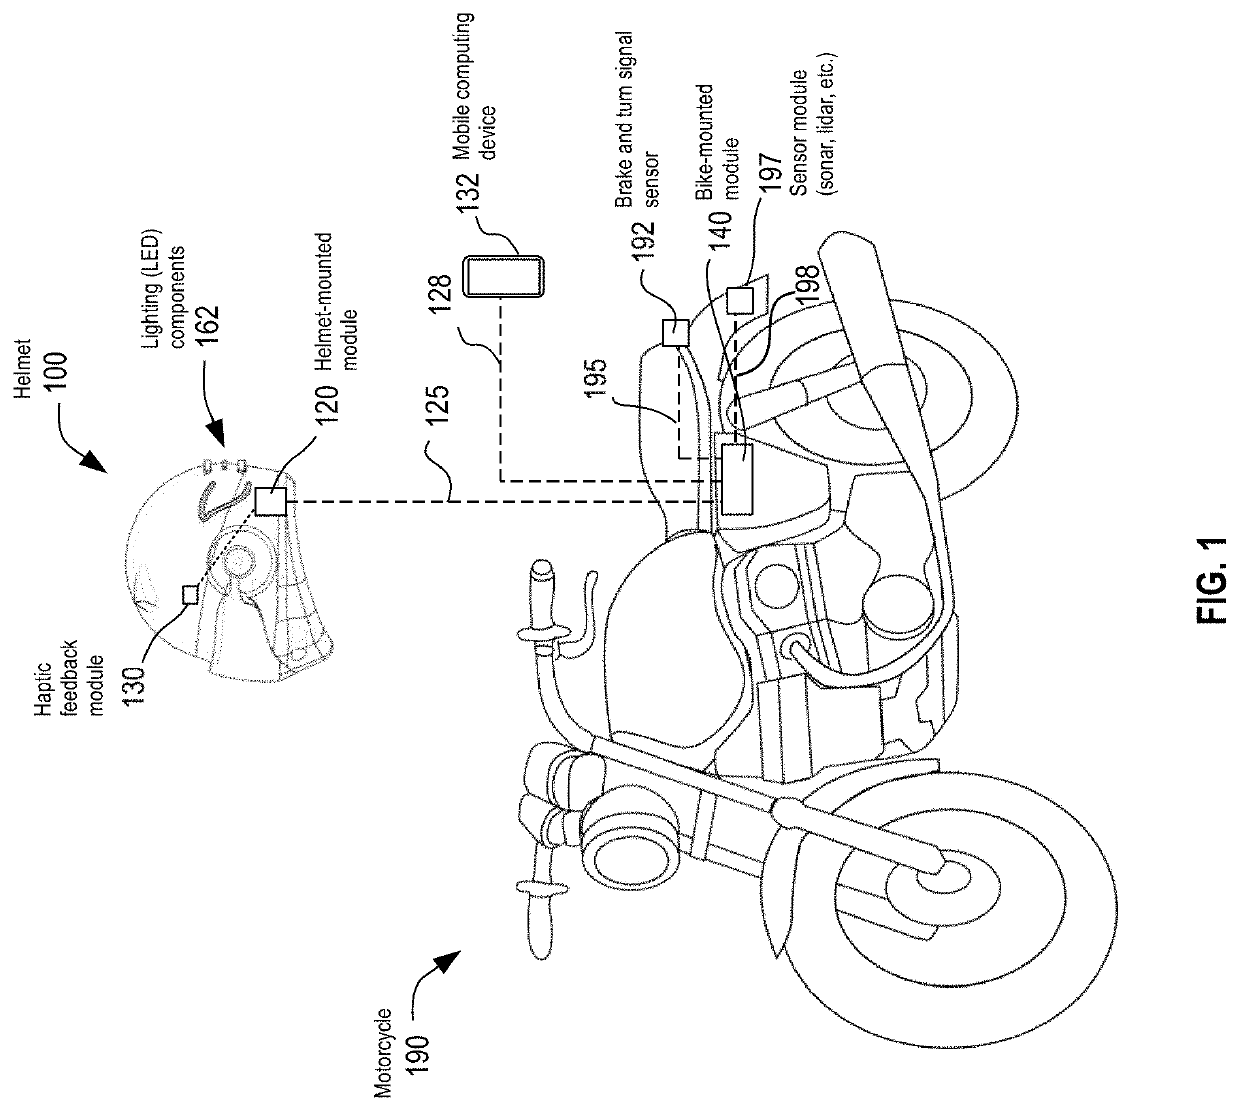 Systems and Methods for An Intelligent Motorcycle Helmet